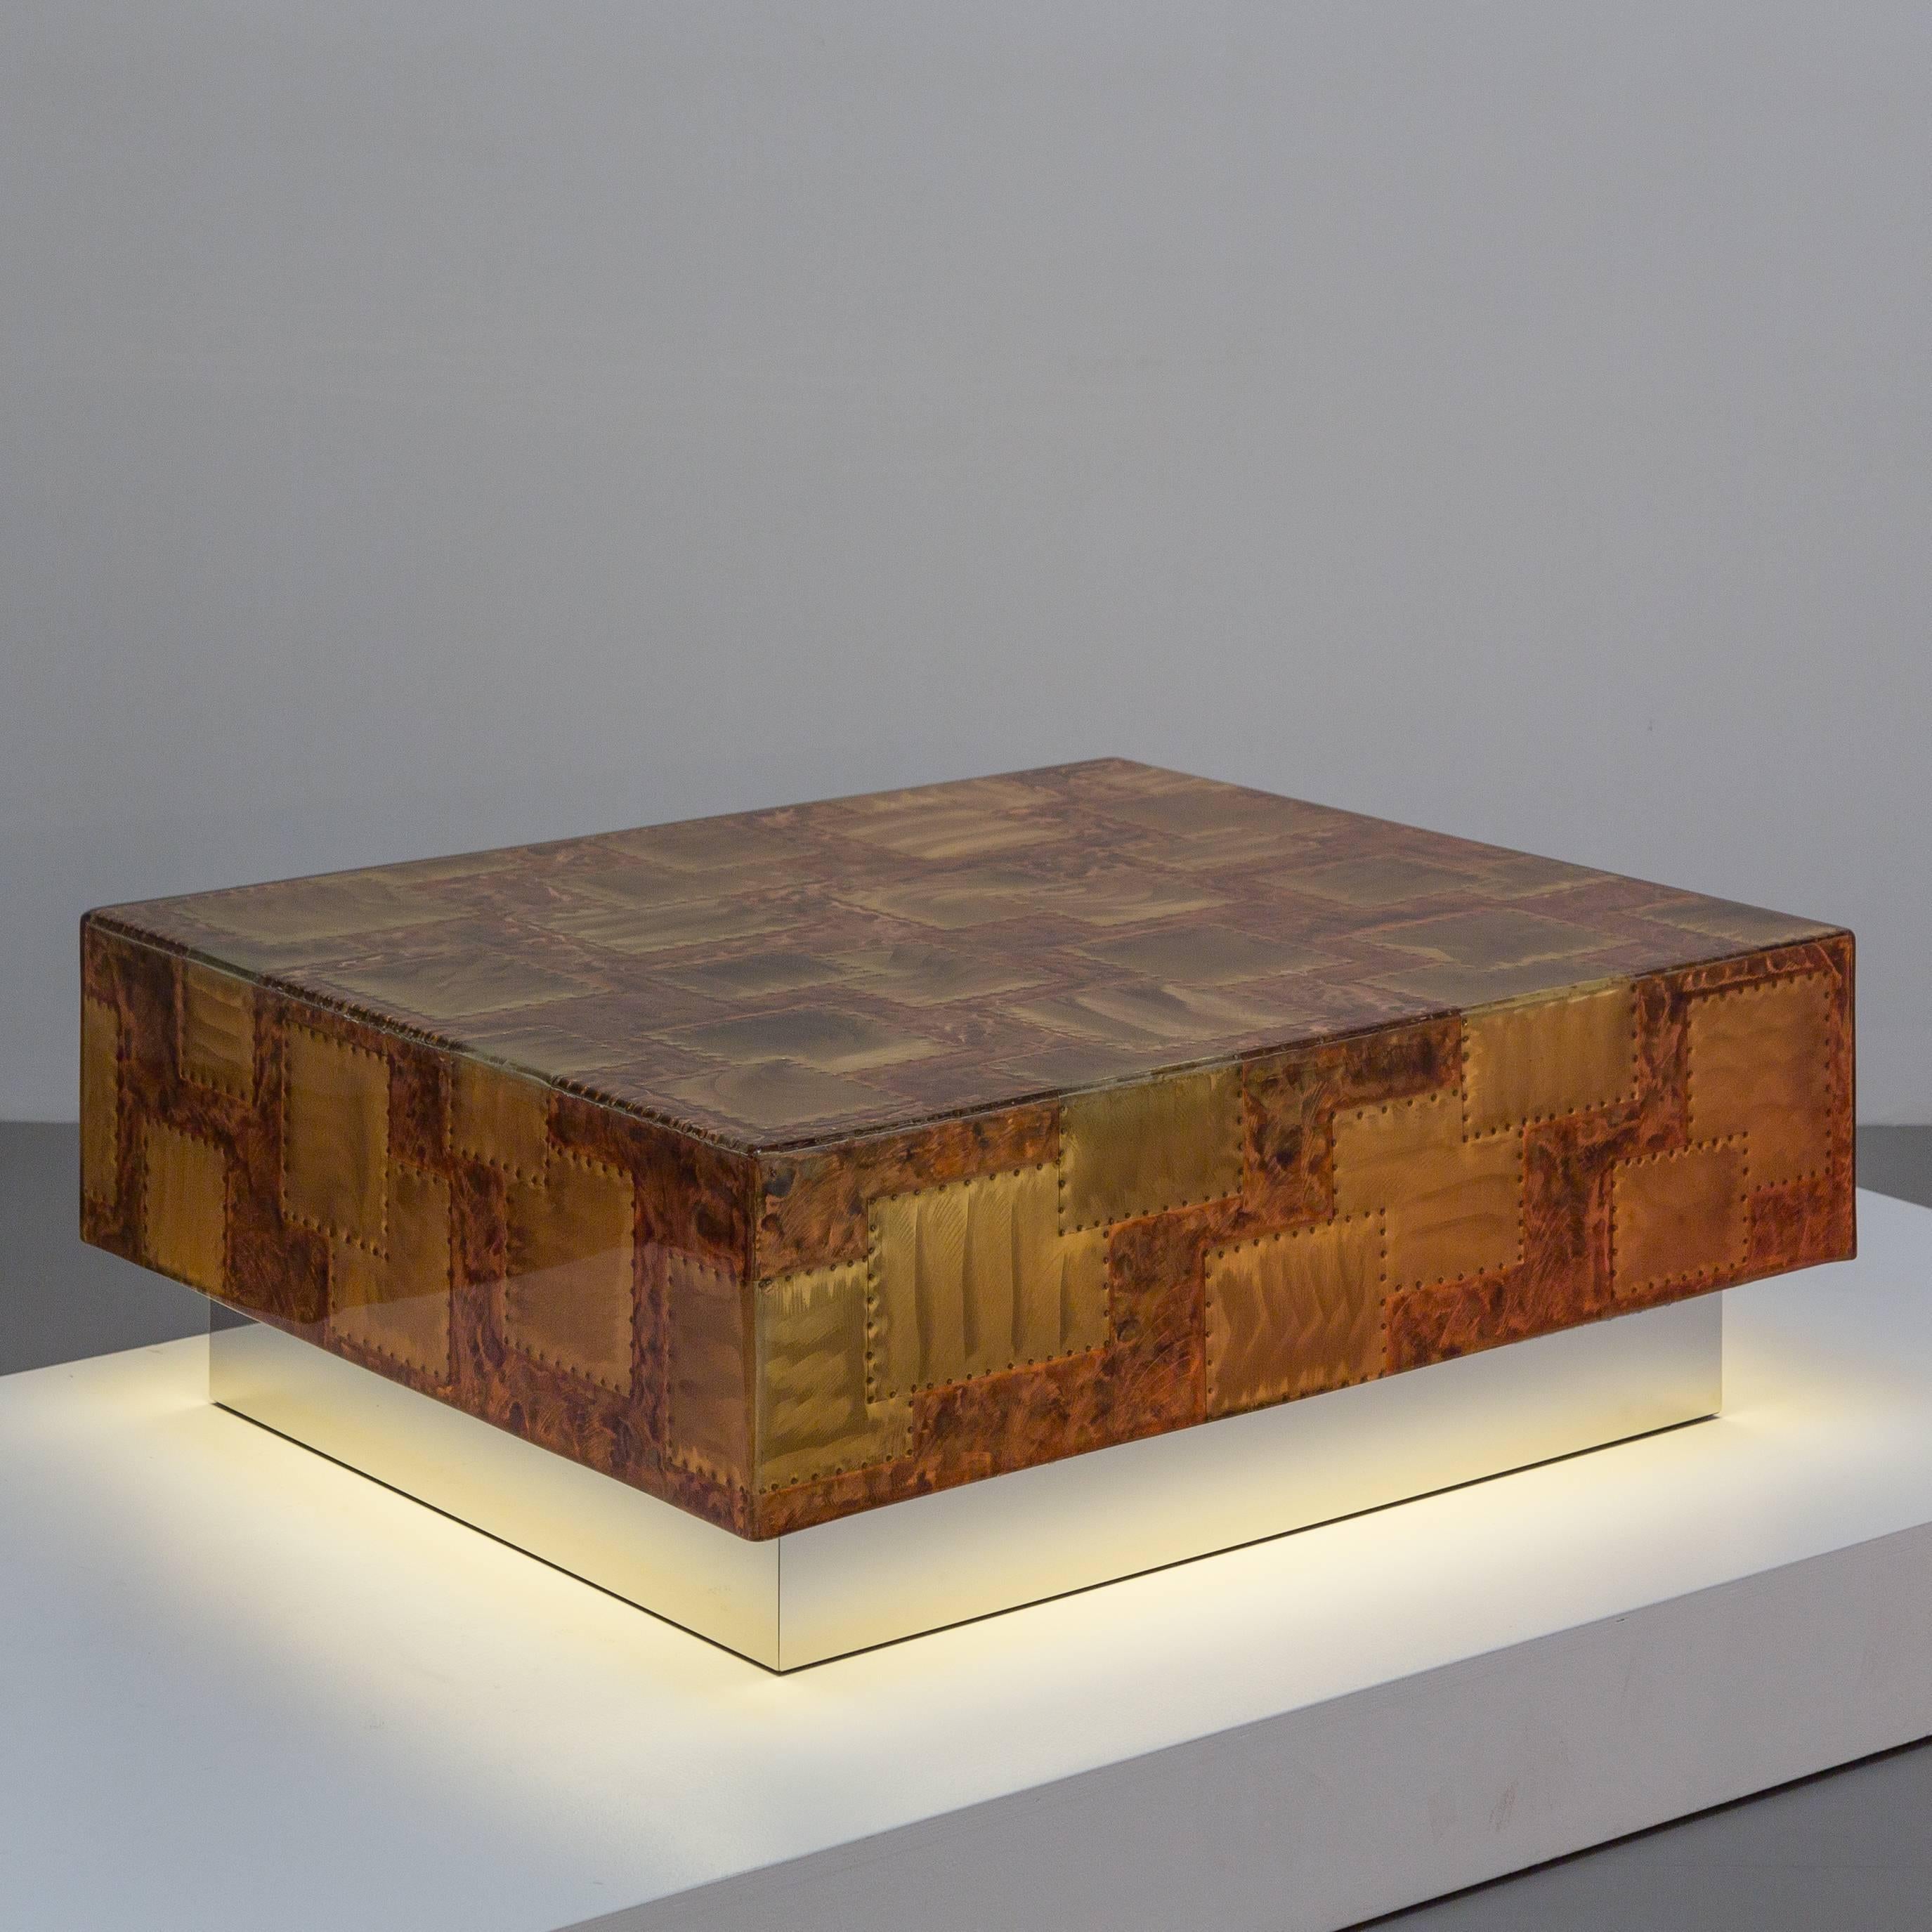 A sensational illuminated lacquered patchwork copper coffee table set on a floating steel base, 1970s.